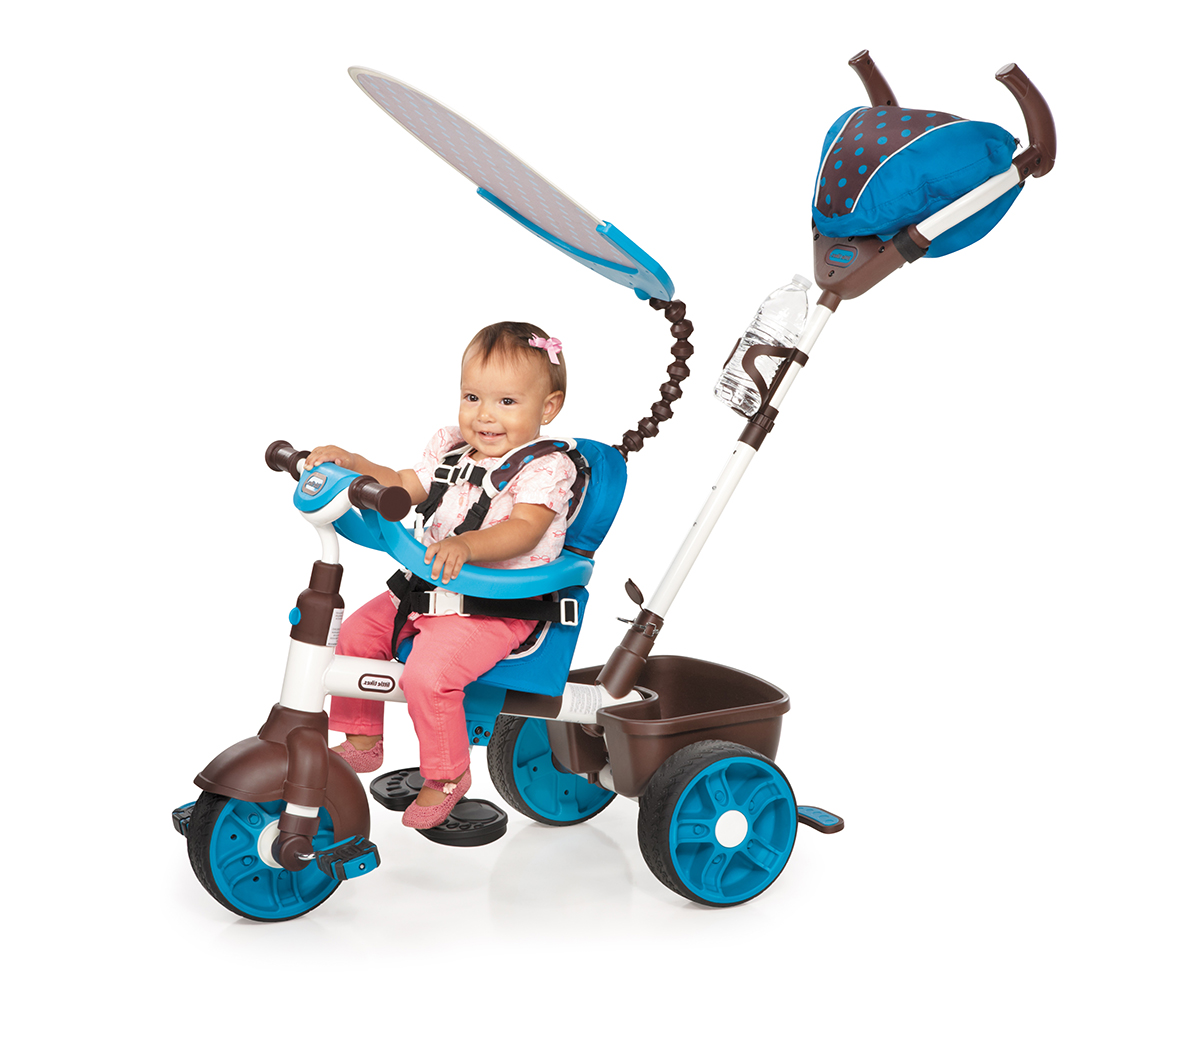 little tikes perfect 4 in 1 trike